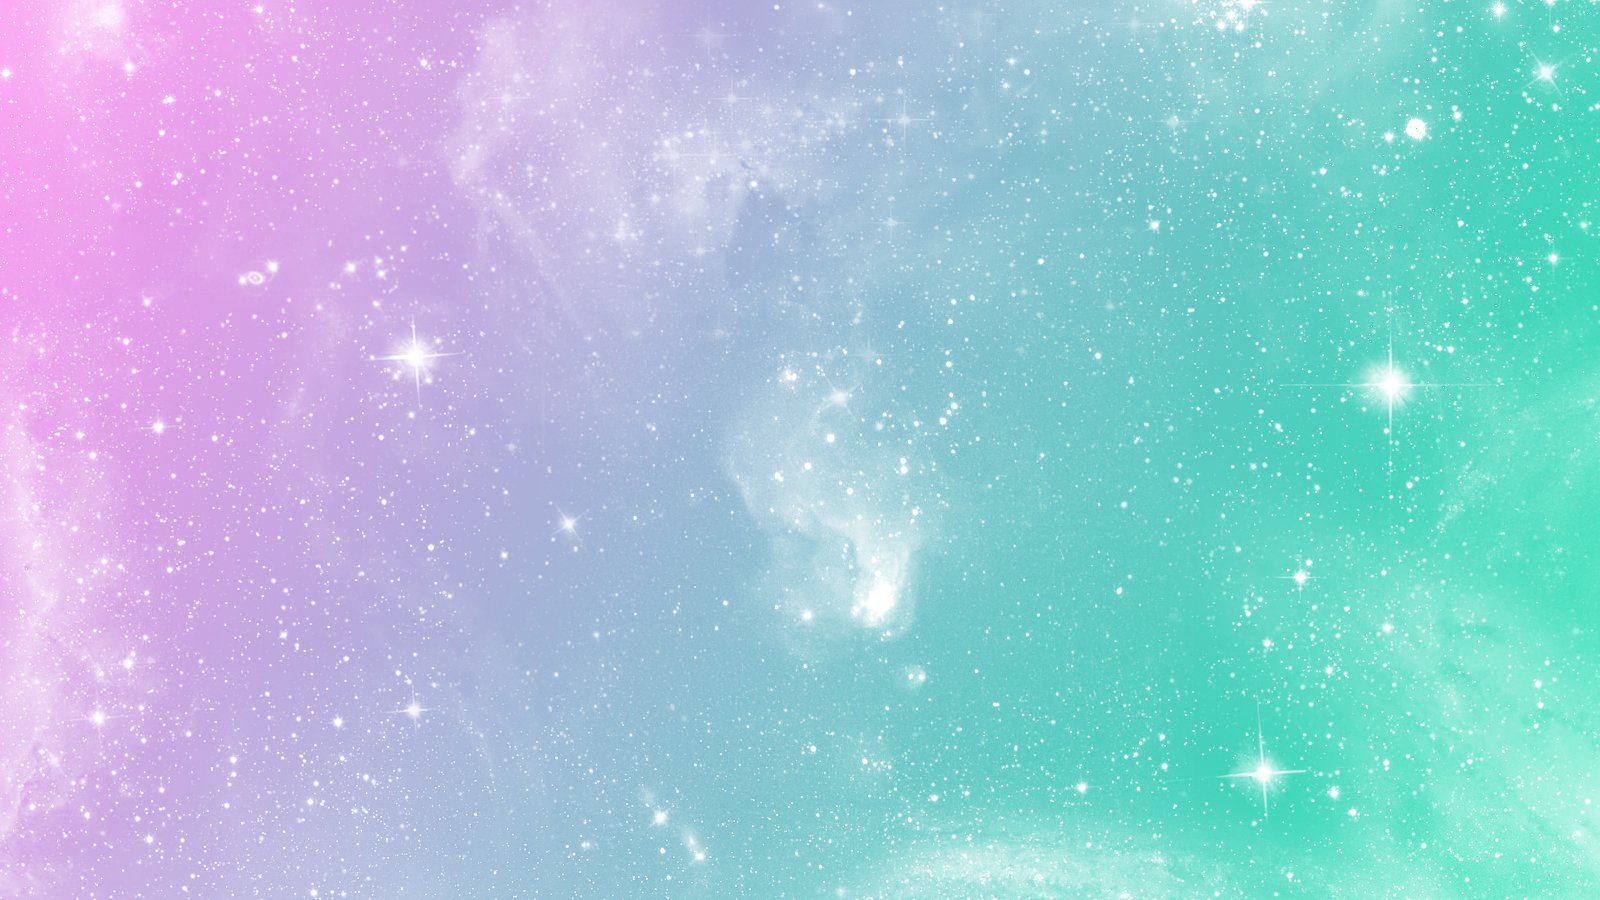 Pastel Galaxy Tumblr Backgrounds Backgrounds tumblr hipster 1600x900